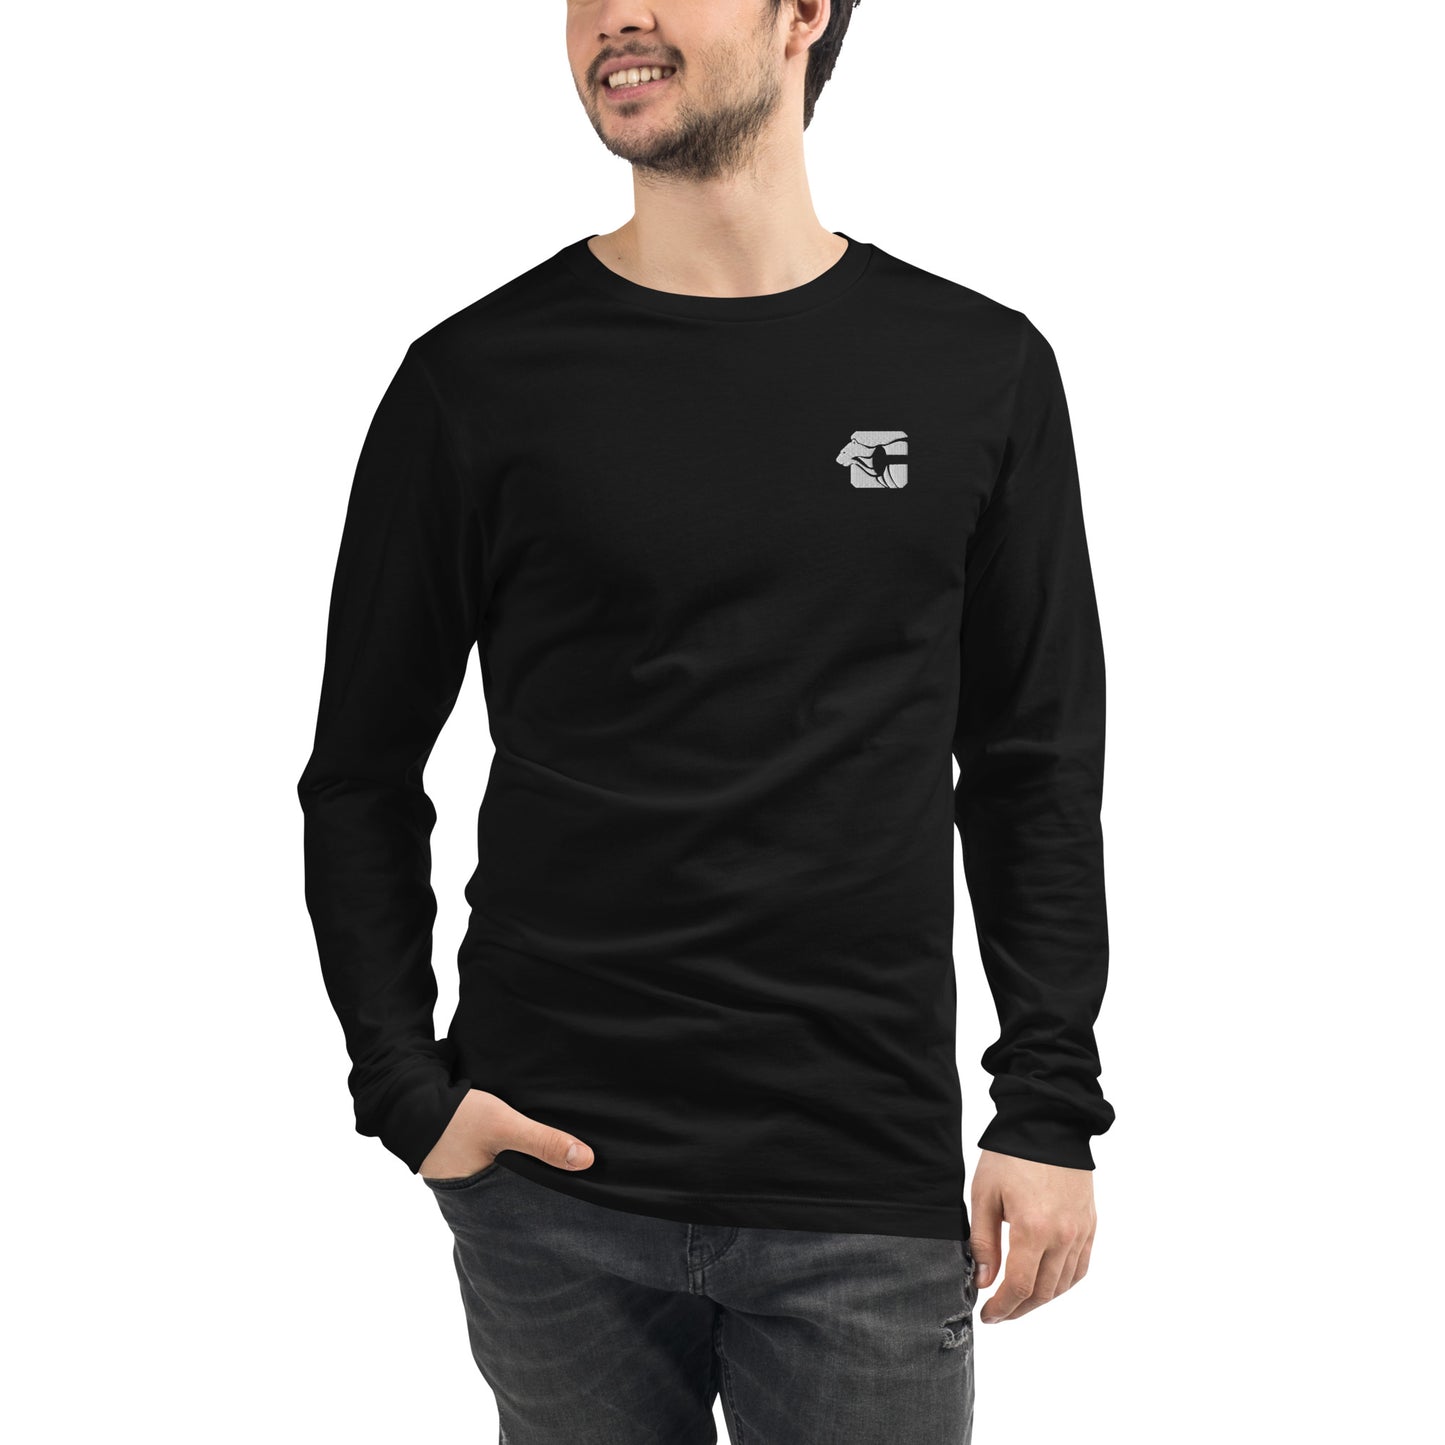 CENTURY ALUMNI EMBROIDERY PANTHER LONG SLEEVE